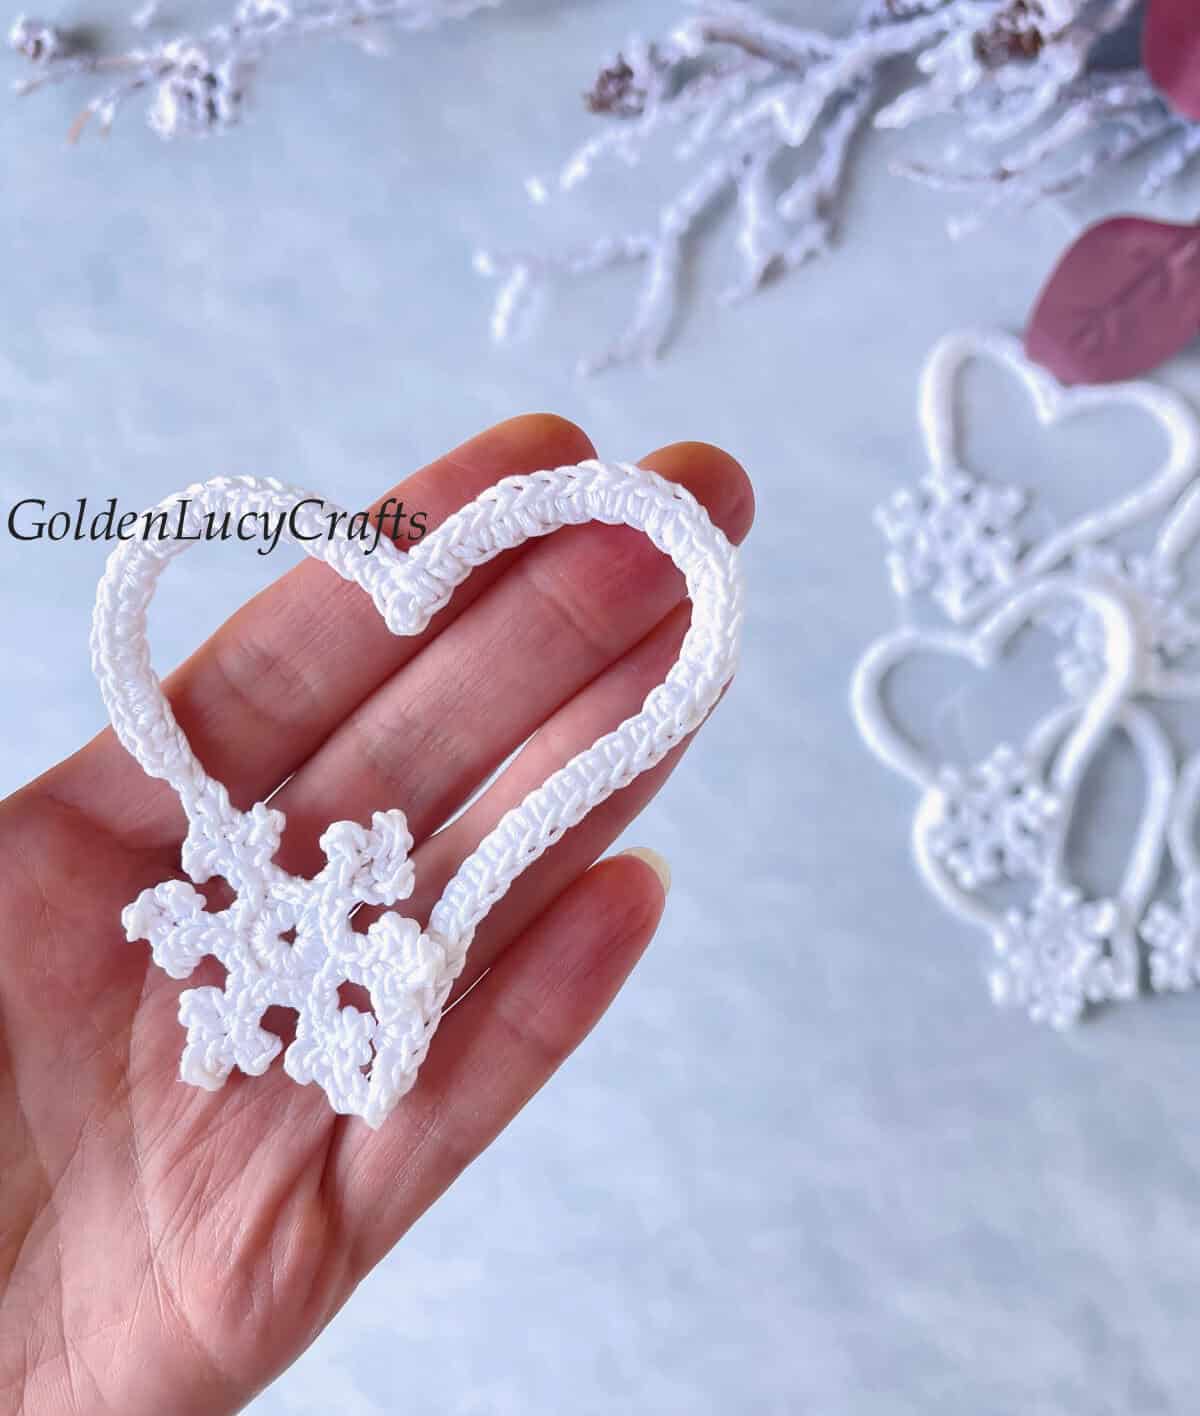 Crochet snowflake heart in the palm of a hand.